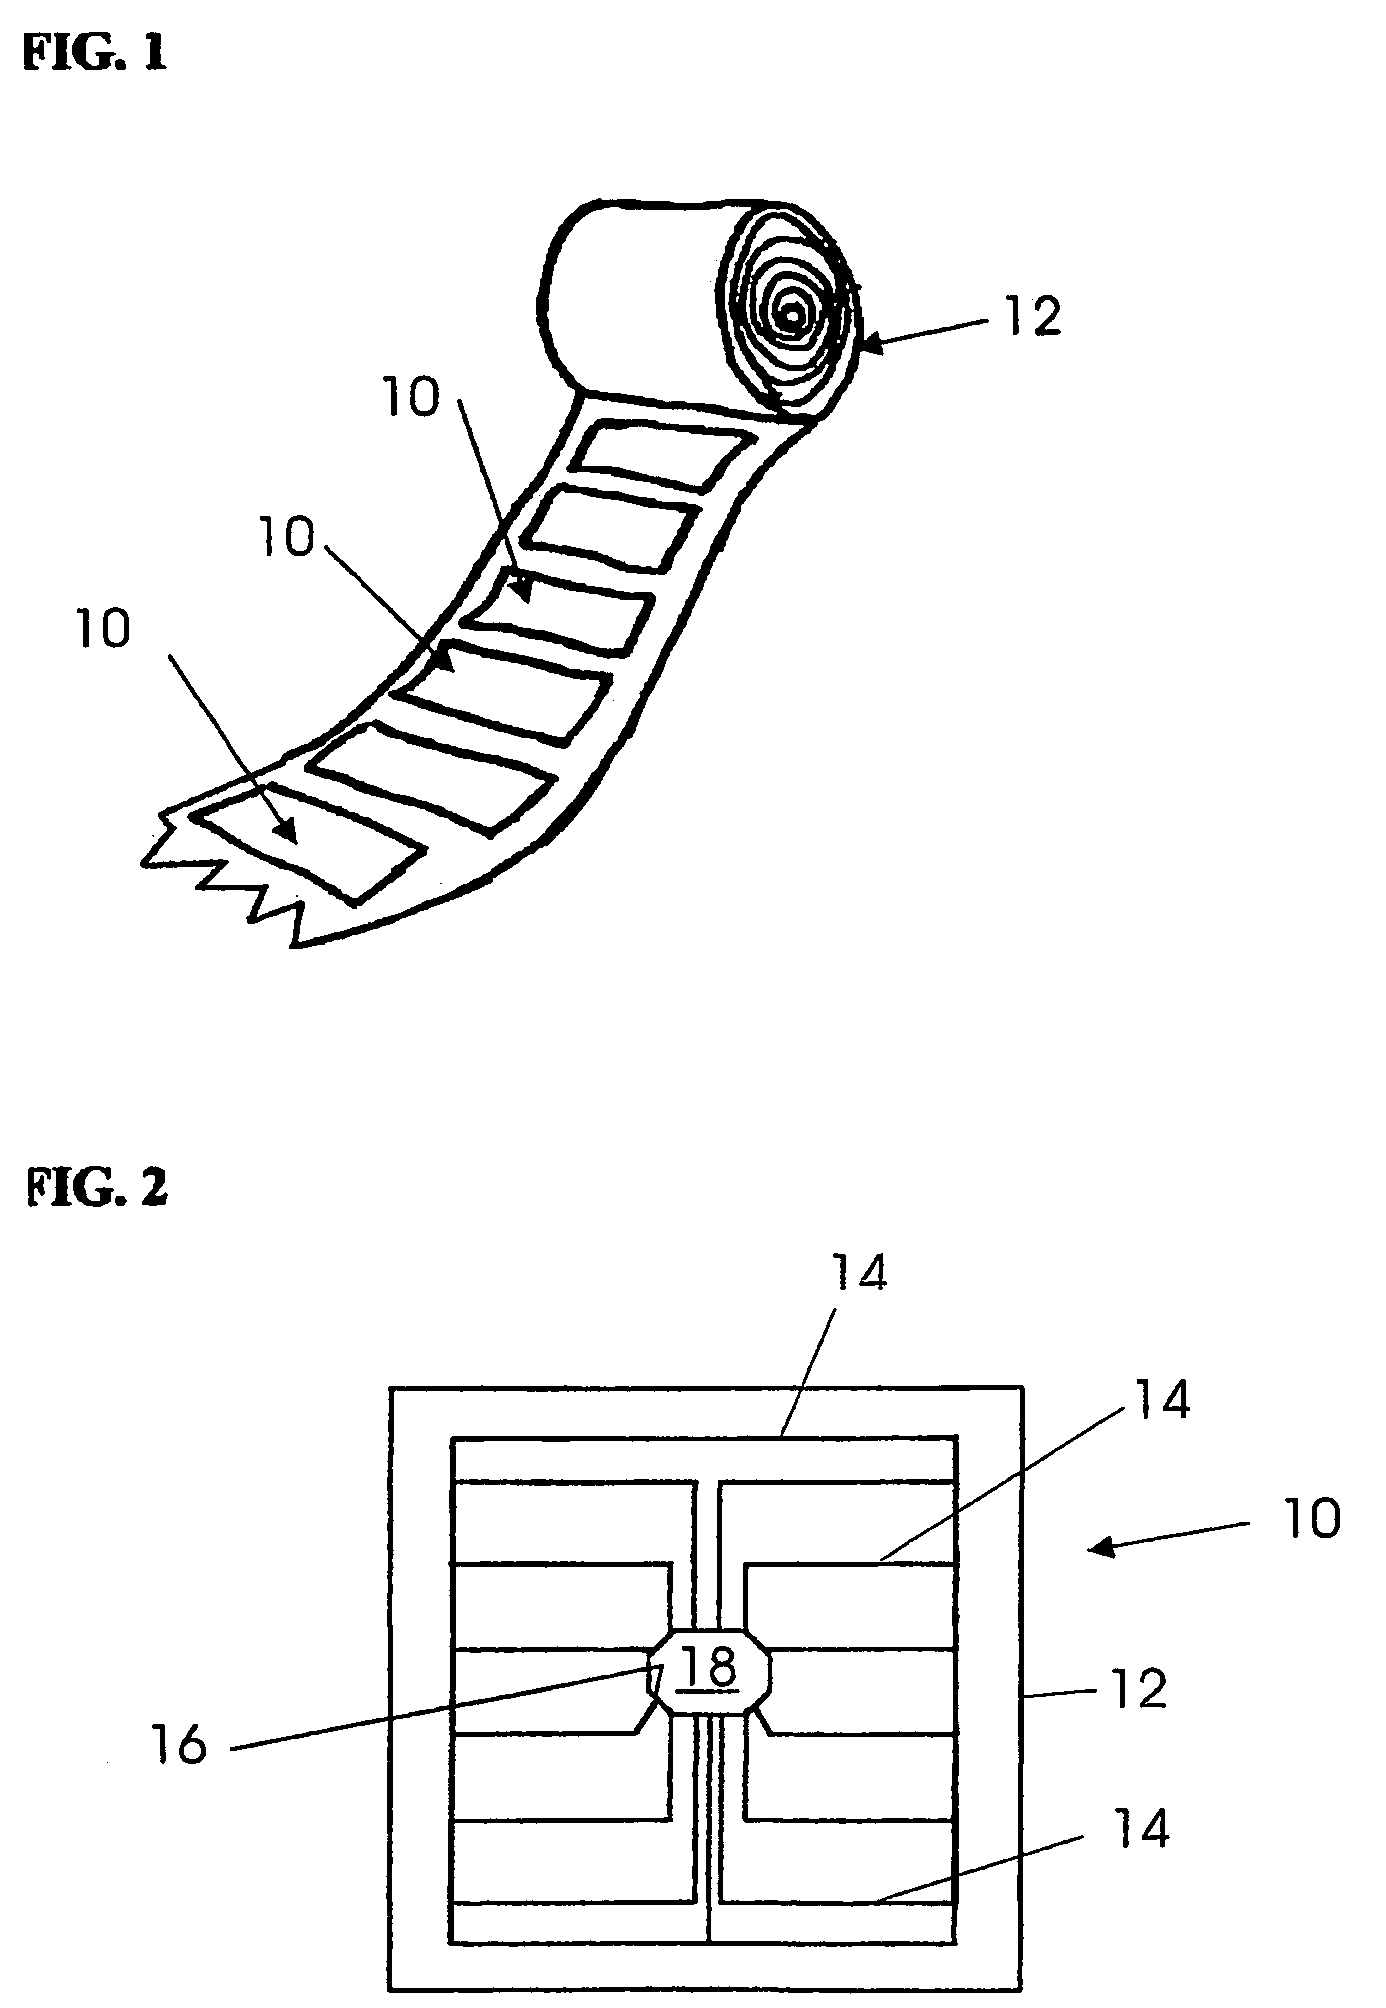 Blister package with electronic content monitoring system